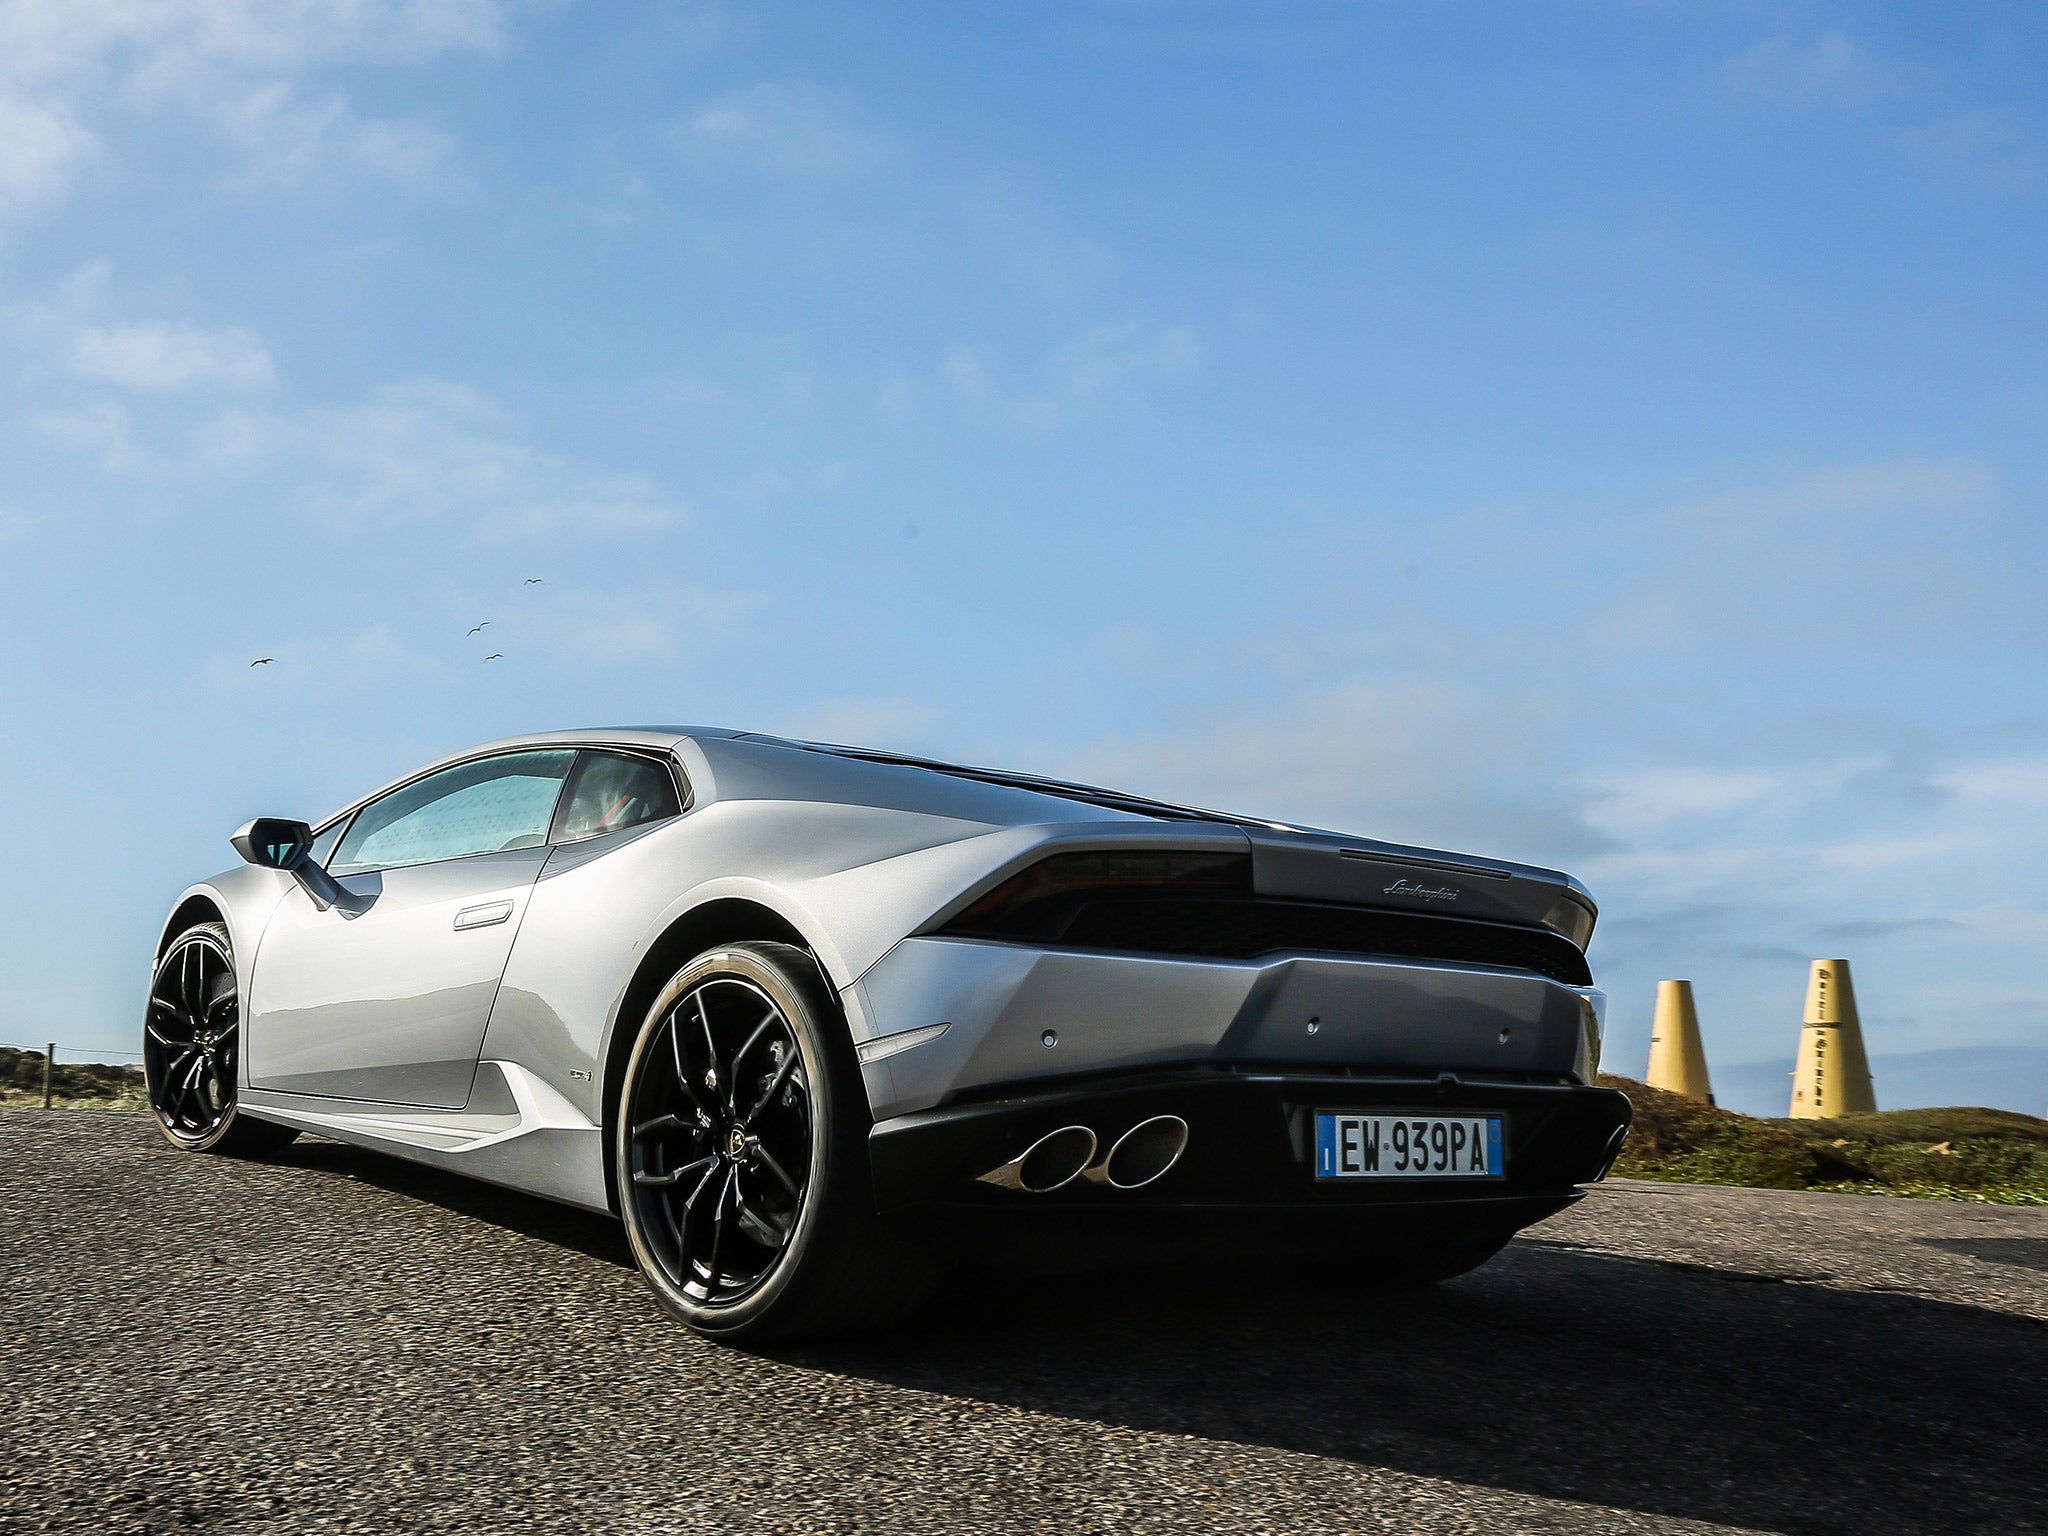 The Lamborghini Huracan's stock exhaust system is a joy to behold